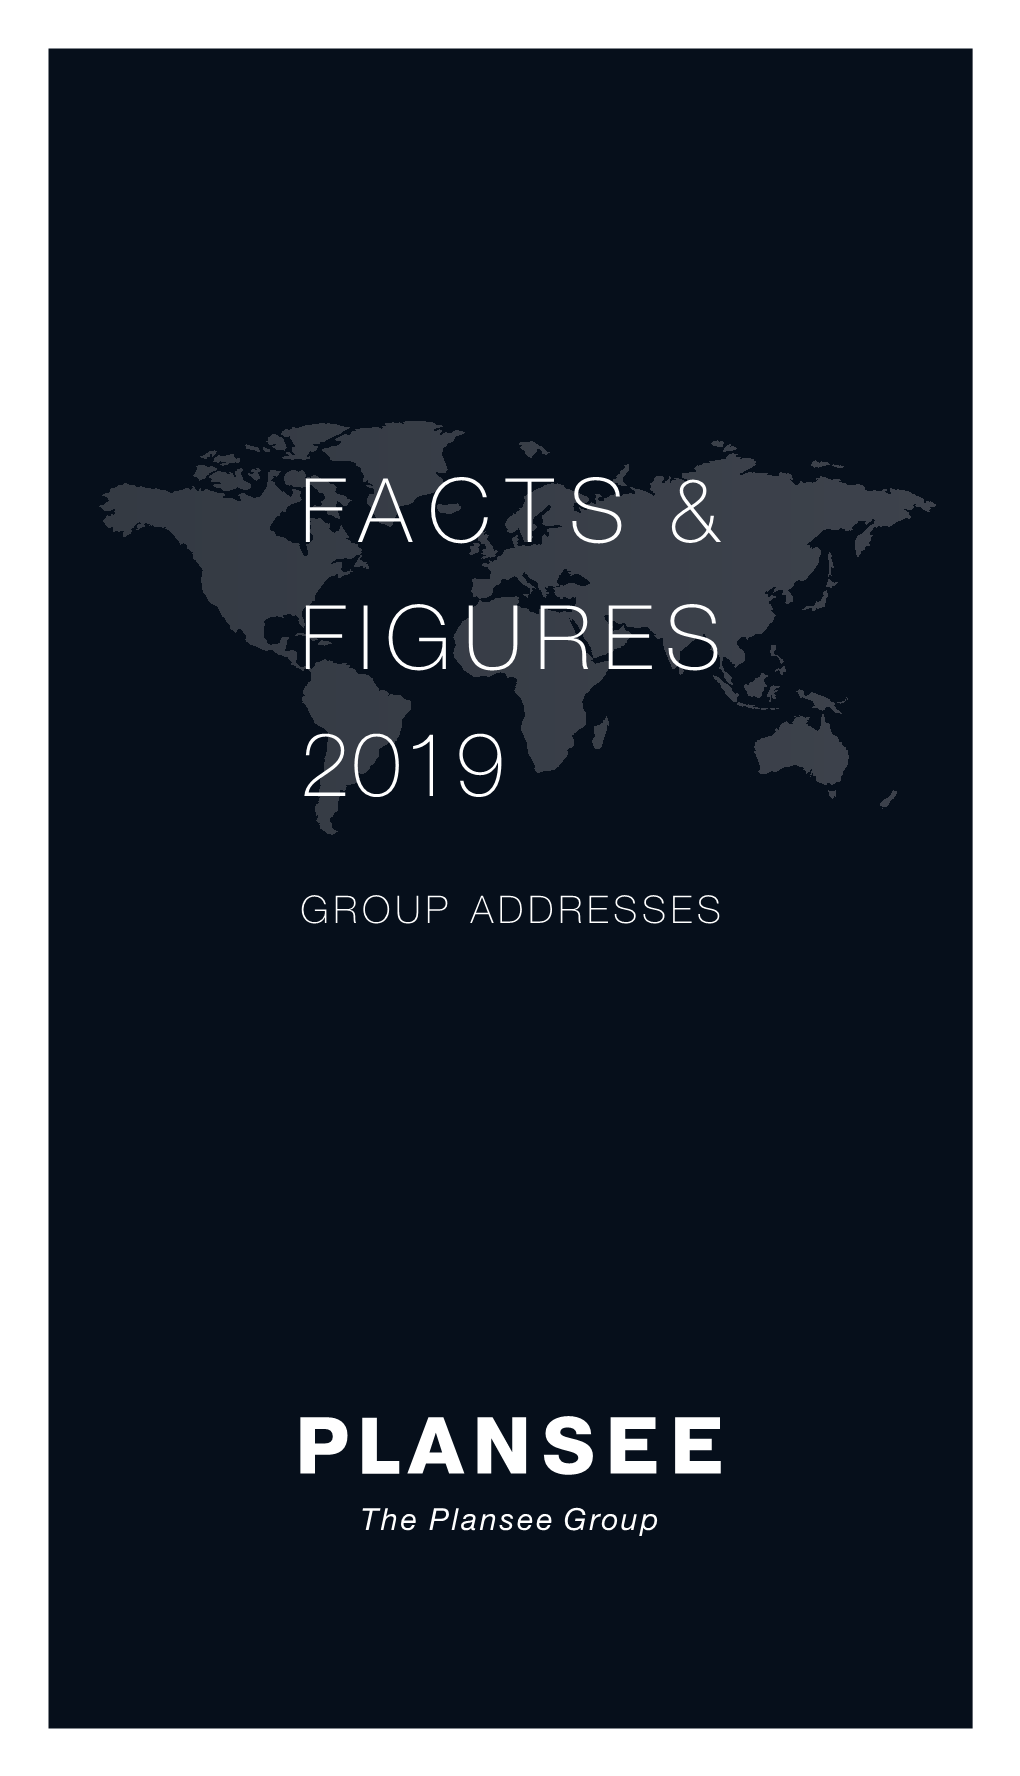 Facts & Figures 2019